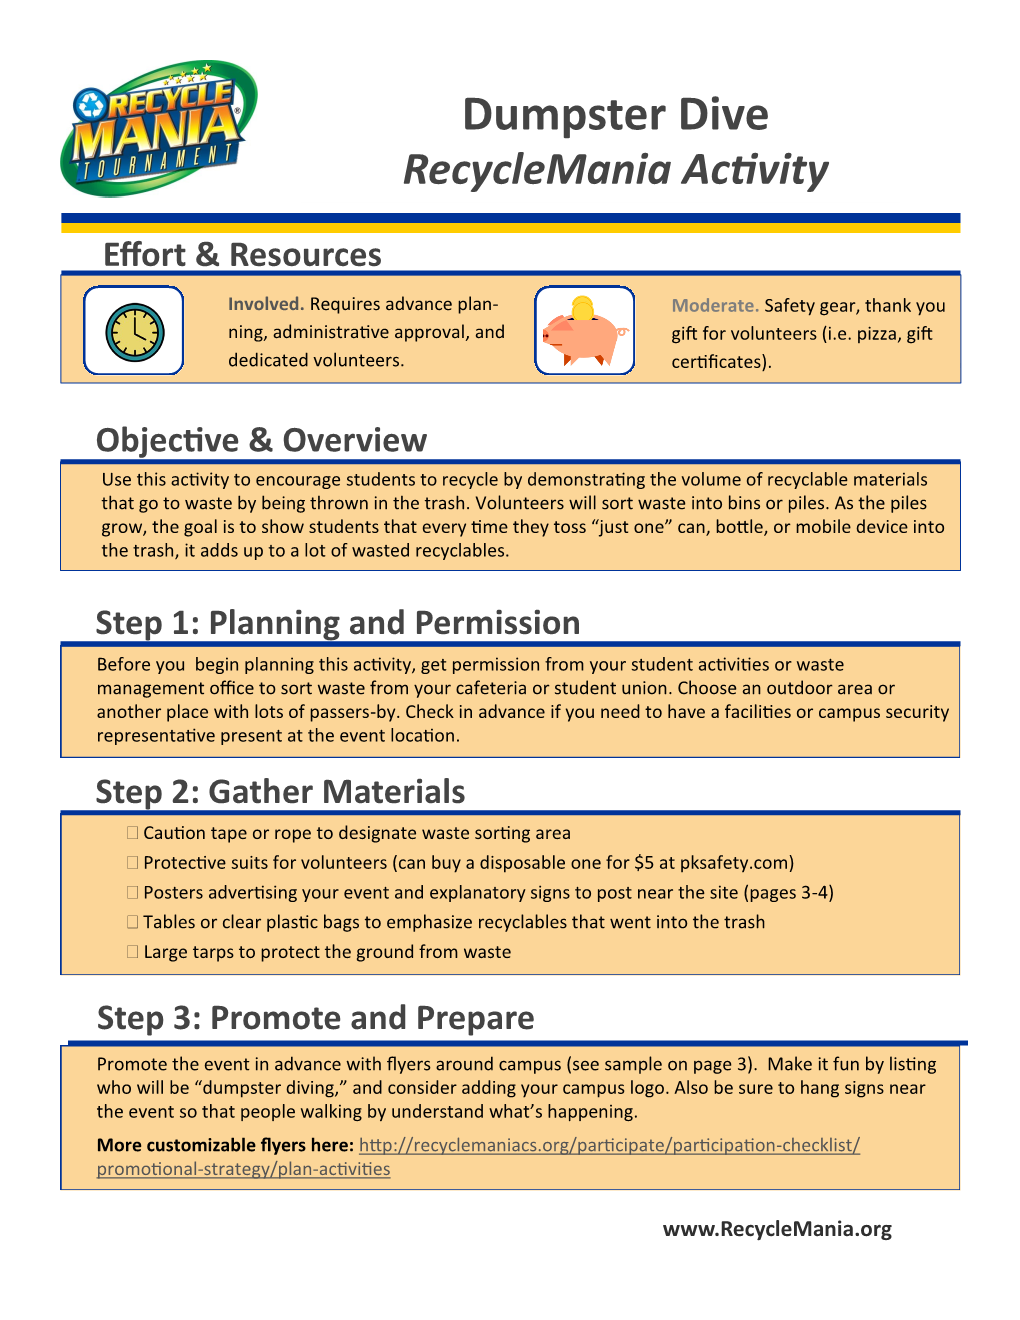 Dumpster Dive Recyclemania Activity